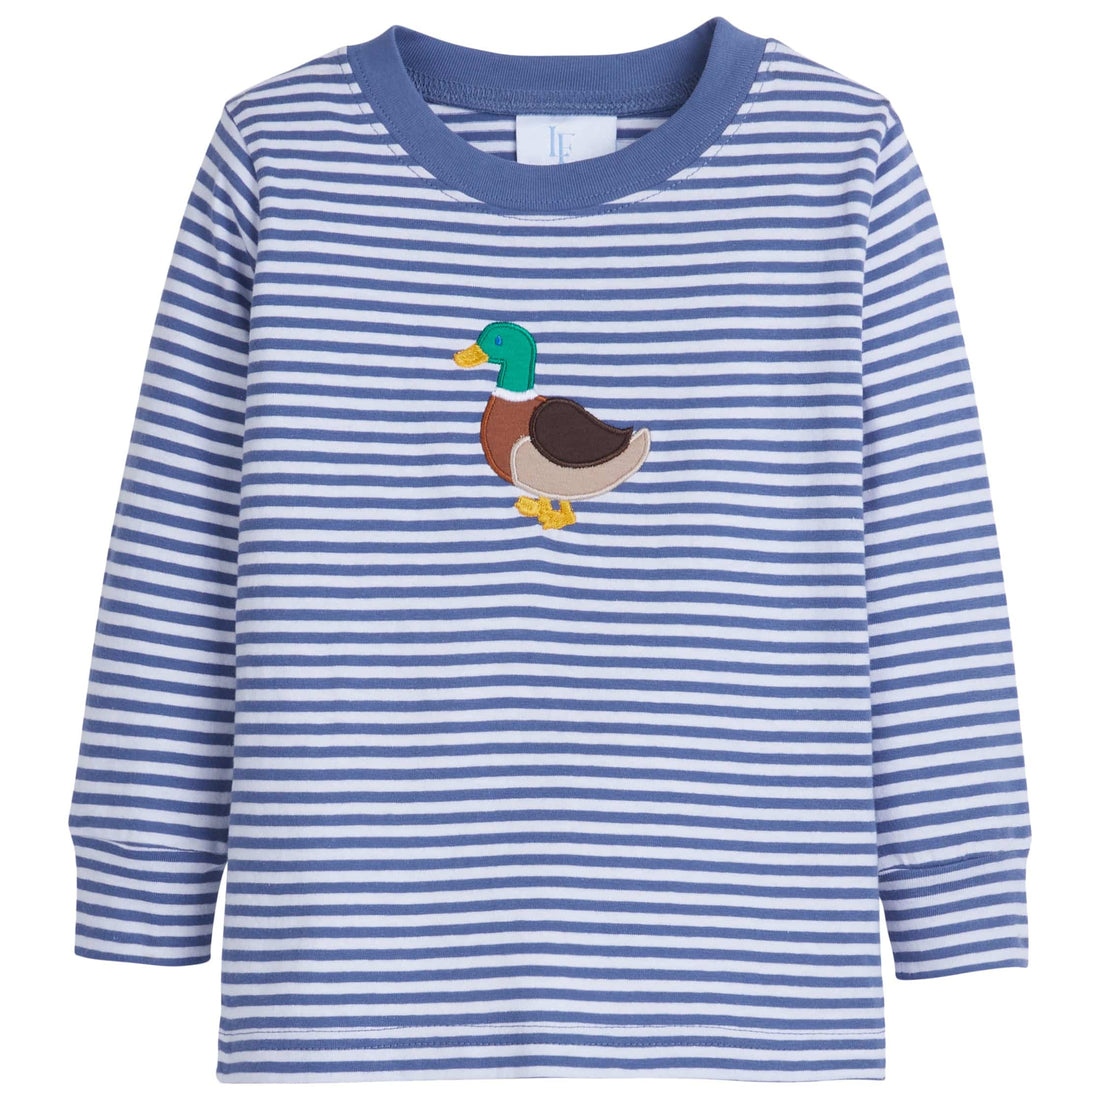 little english classic childrens clothing boys long sleeved royal blue striped t-shirt with applique mallard